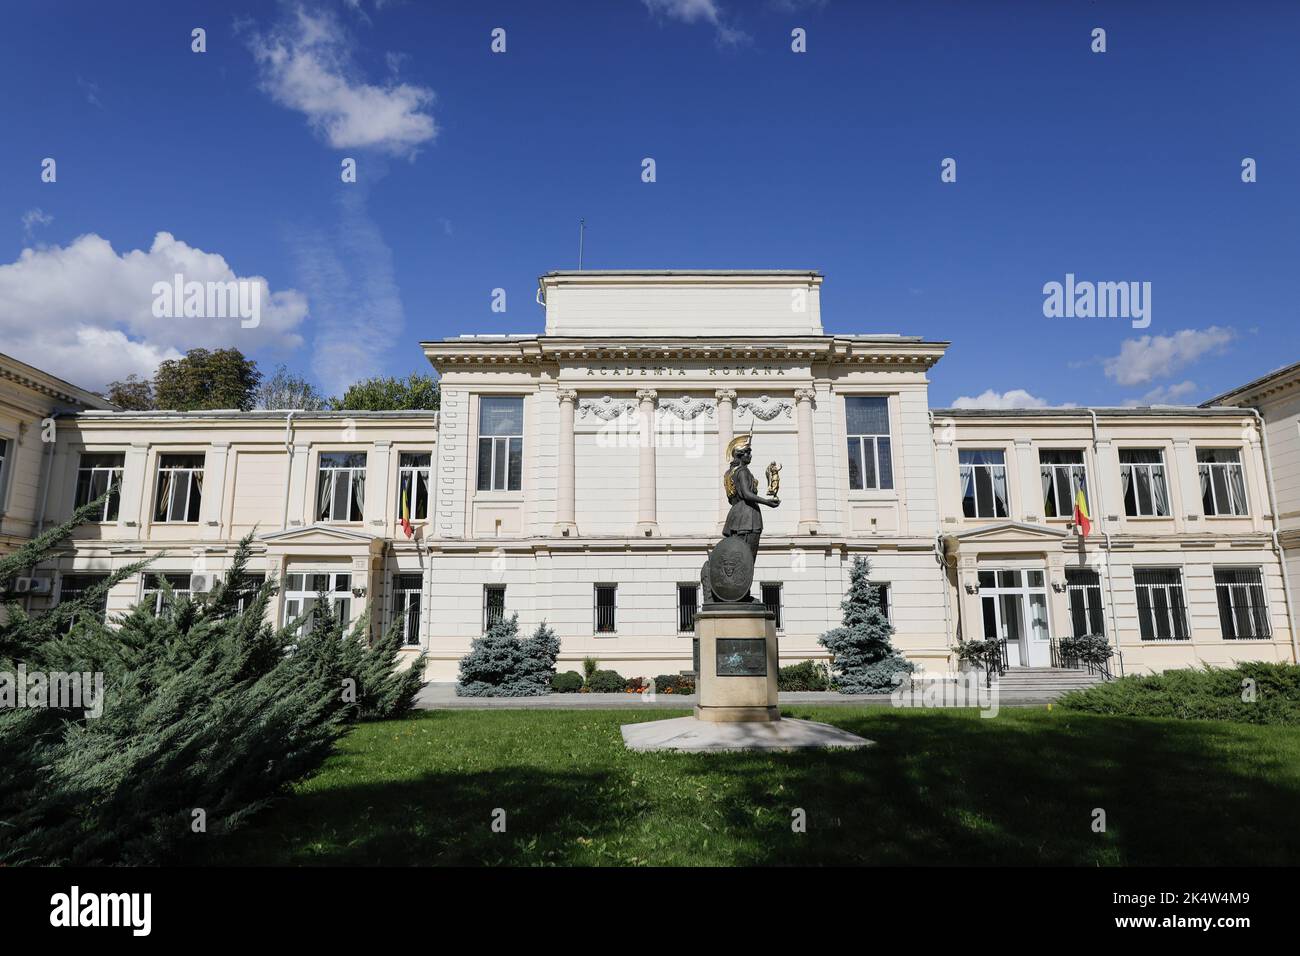 Bucharest, Romania - October 4, 2022: The building of the Romanian Academy, with the Athena Nike statue in front. Stock Photo